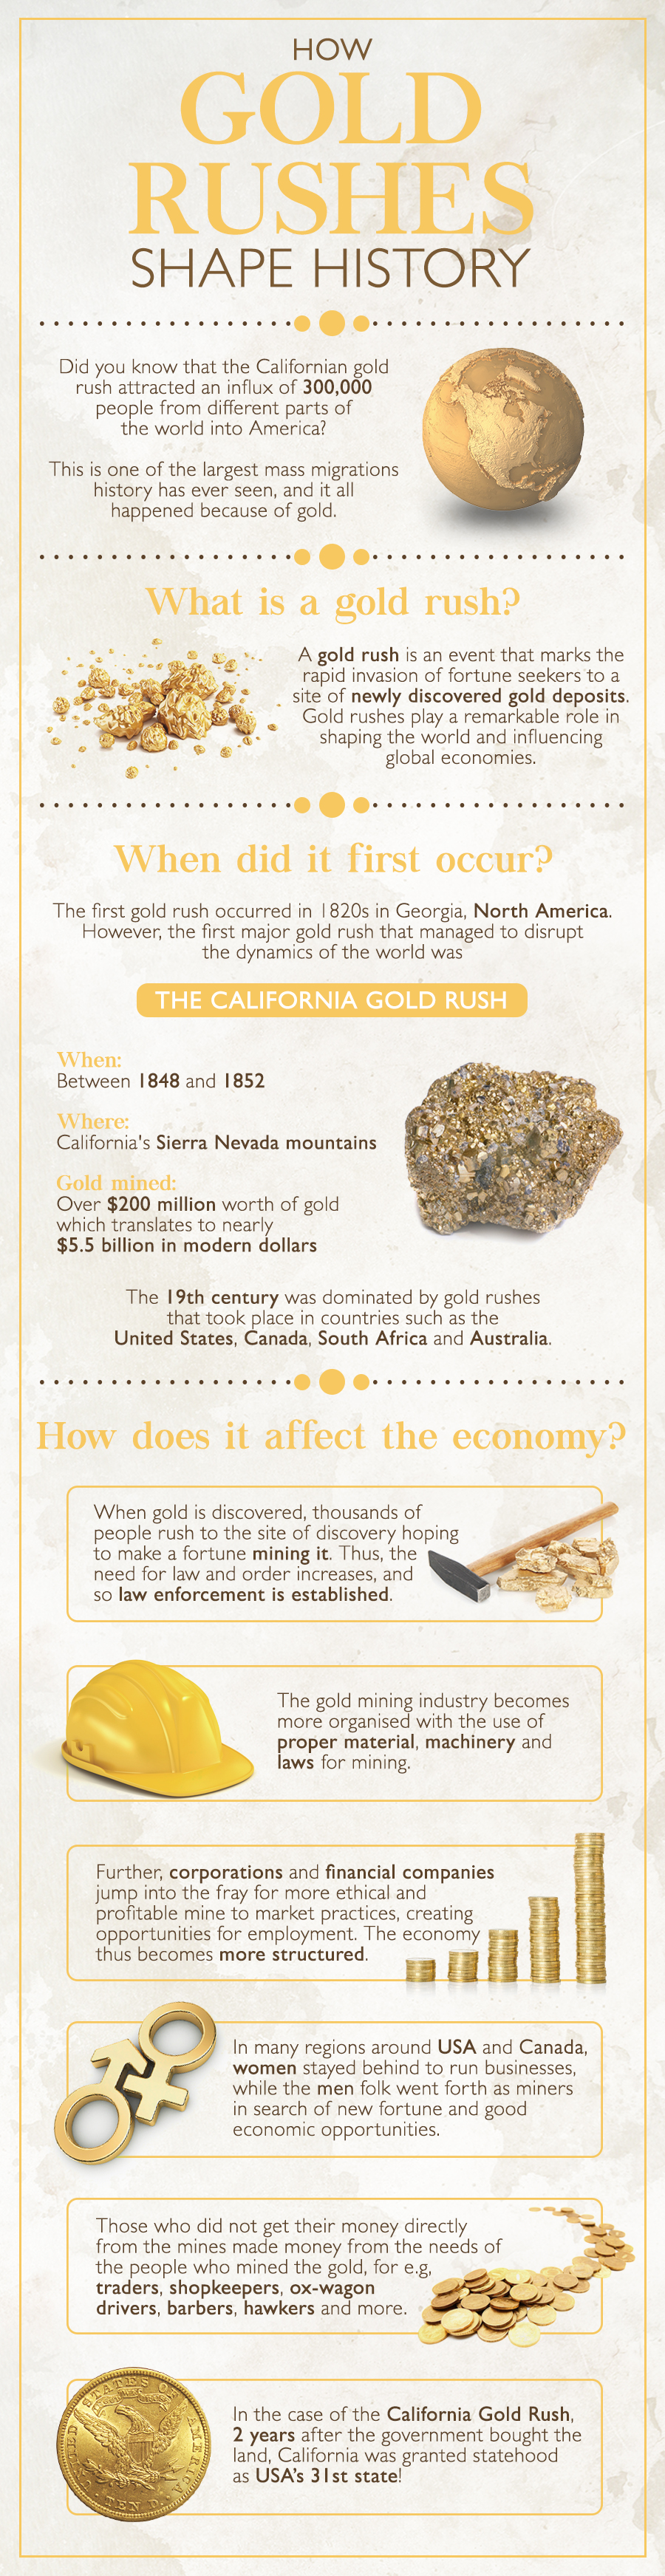 Gold rush play an important part in shaping the economy of any country. Know facts on how the Californian gold rush played a crucial role in shaping the US economy.